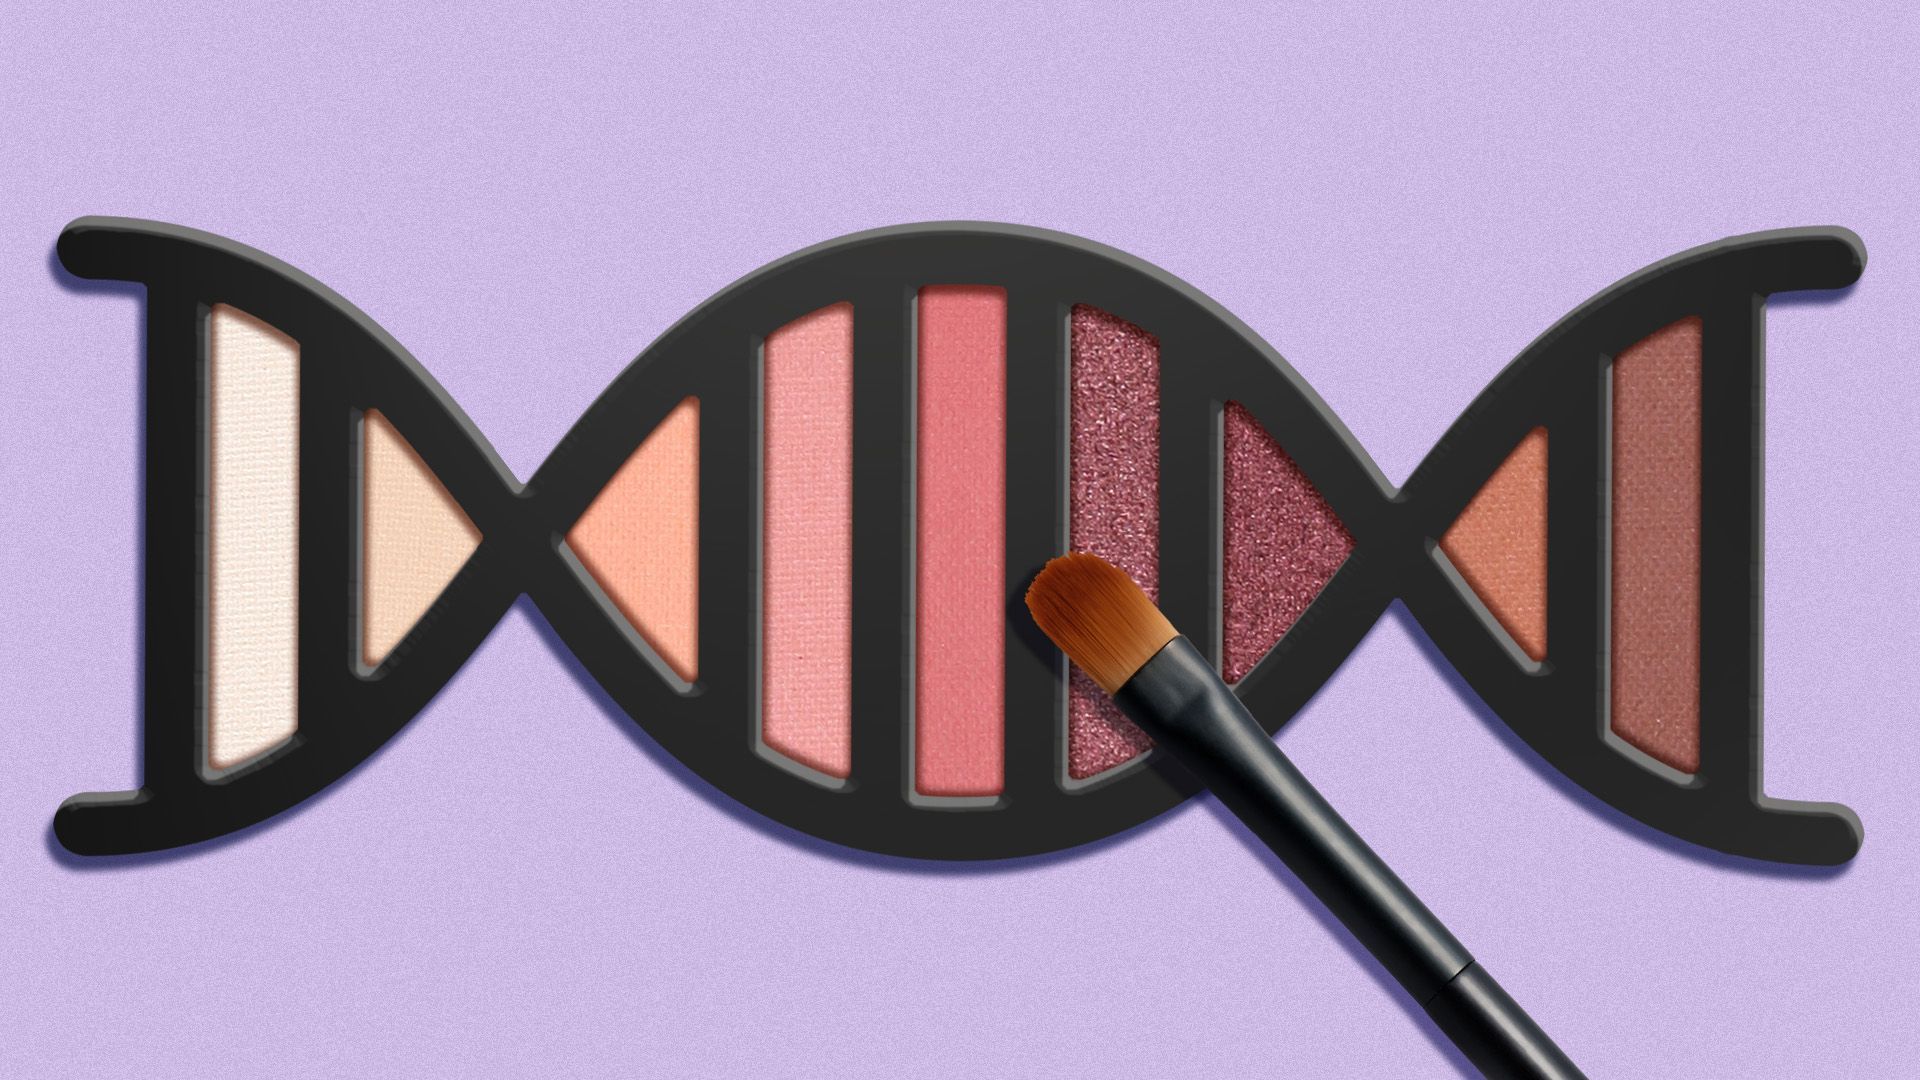 Illustration of a makeup compact in the shape of a strand of DNA